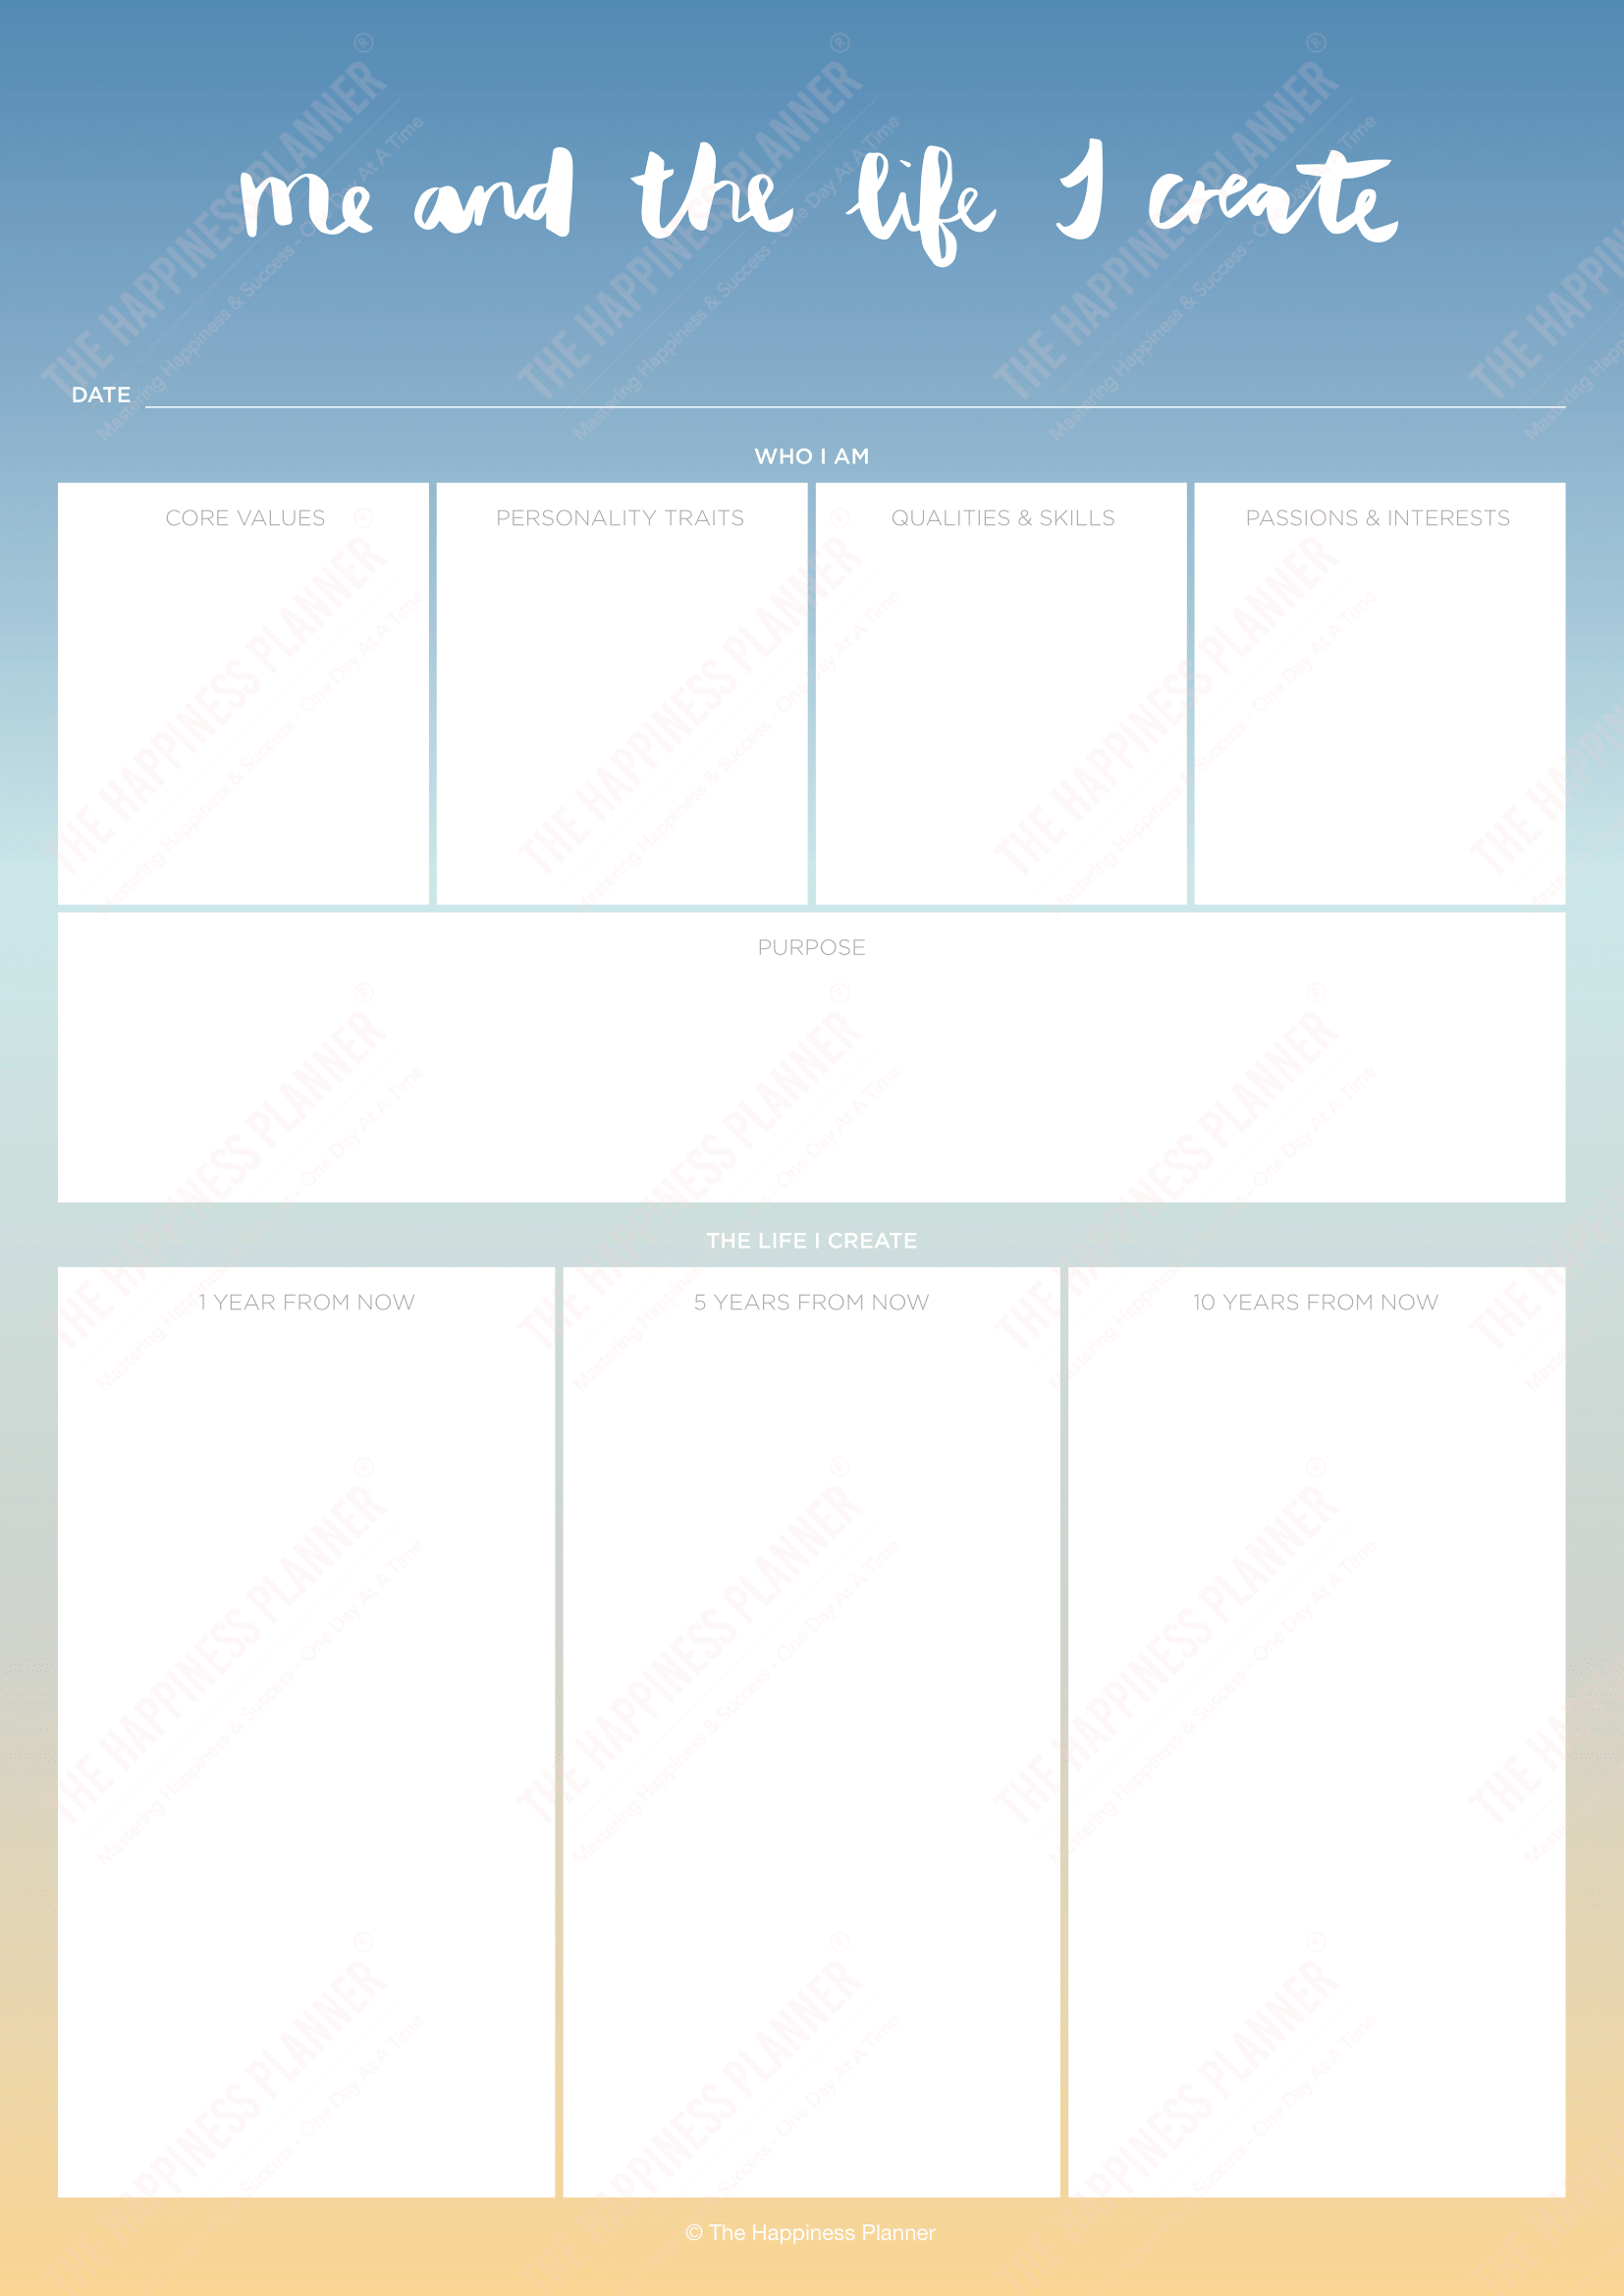 Premium Printables: #Goals I - The Happiness Planner®